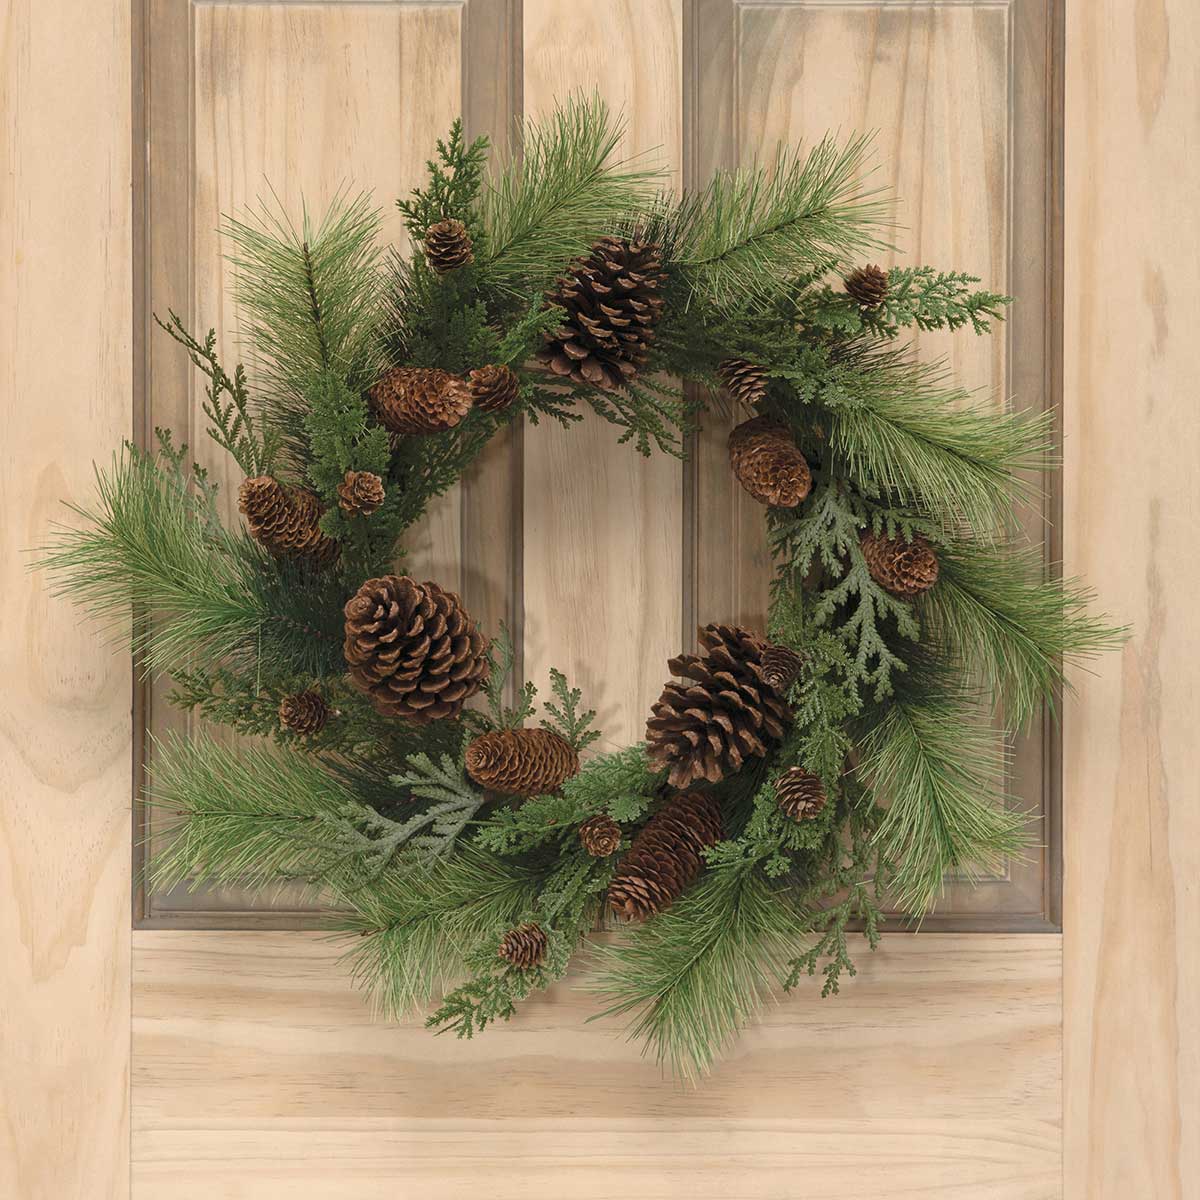 NATURAL PINE MIX WREATH WITH PINECONES 24" (INNER RING 10")